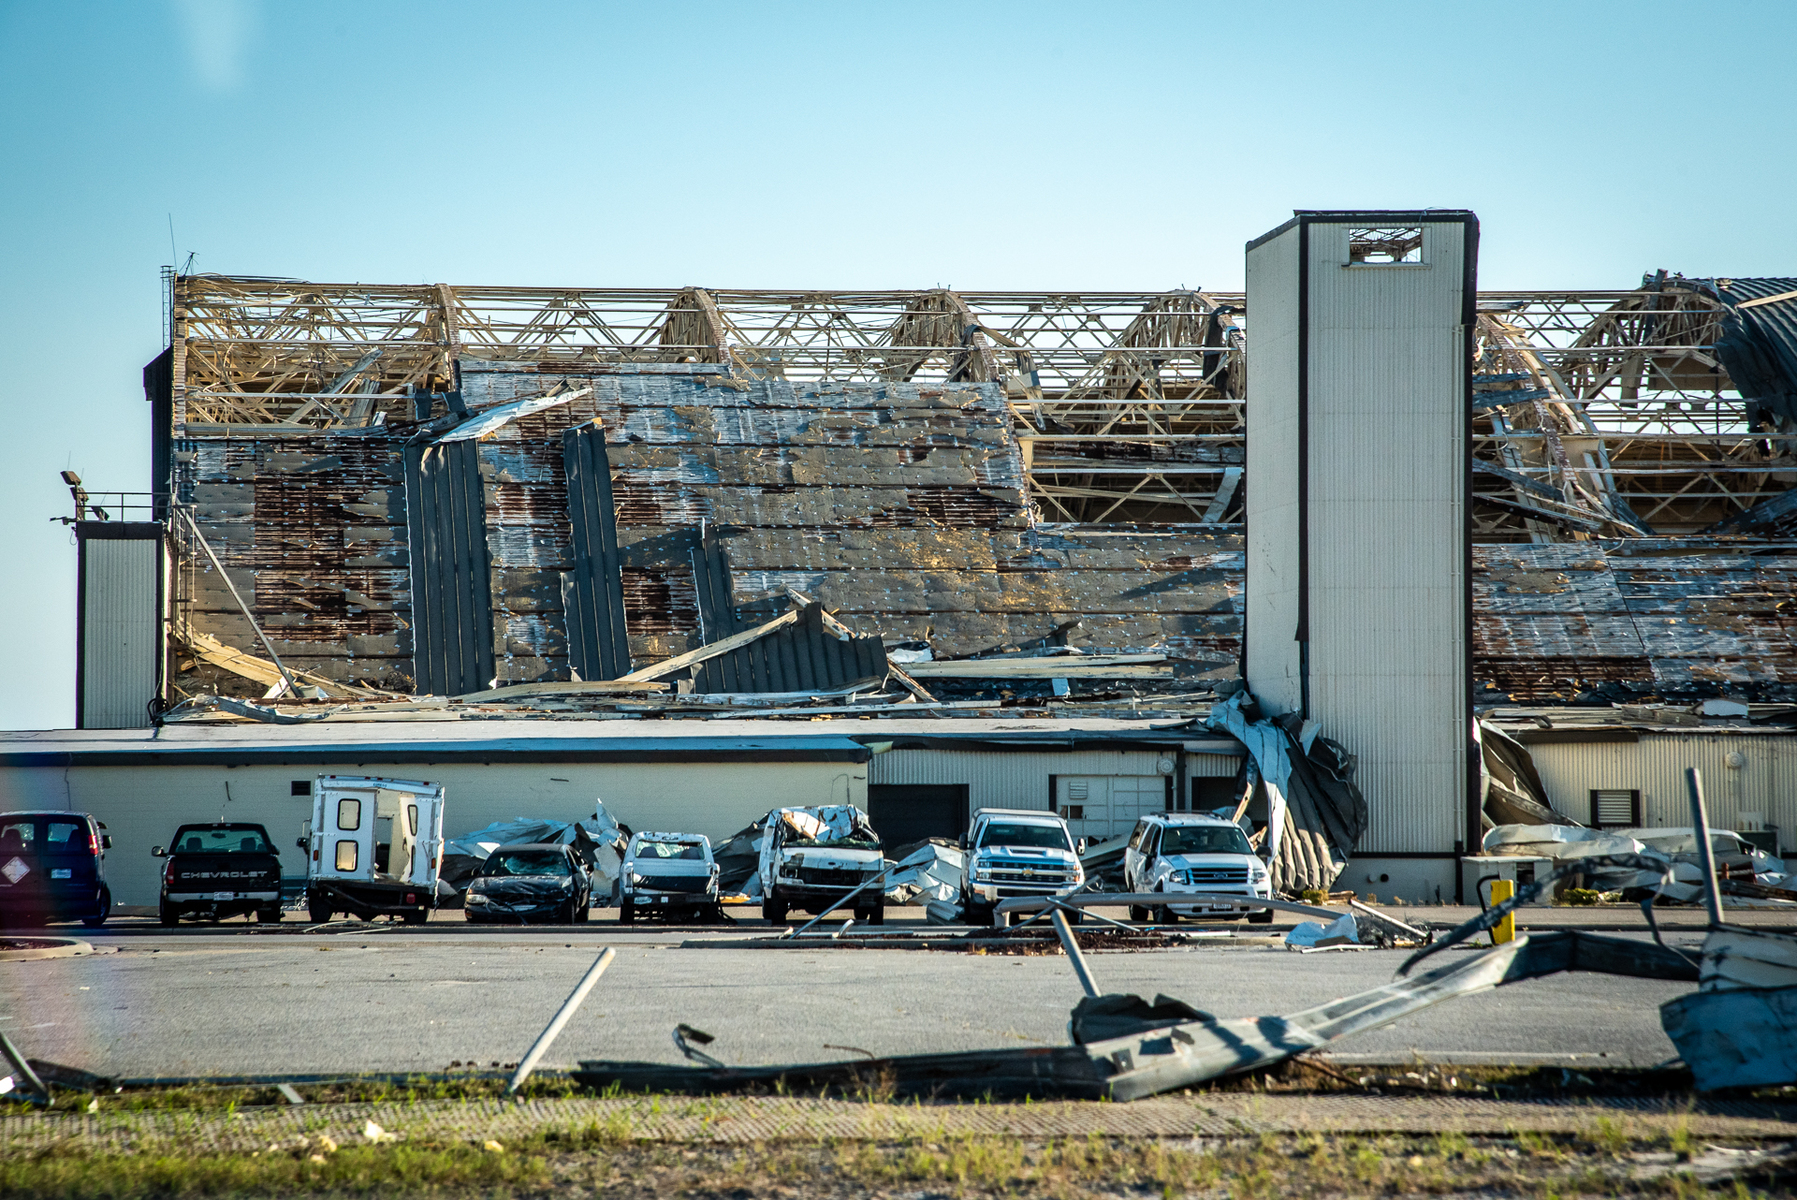 October 18, 2018 - Debris litters Tyndall Air Force Base near Panama City said it had sustained a direct hit from the catastrophic storm after Hurricane Michael’s eye went over the base in the Florida Panhandle. No one was hurt on the base, but every building sustained damage.